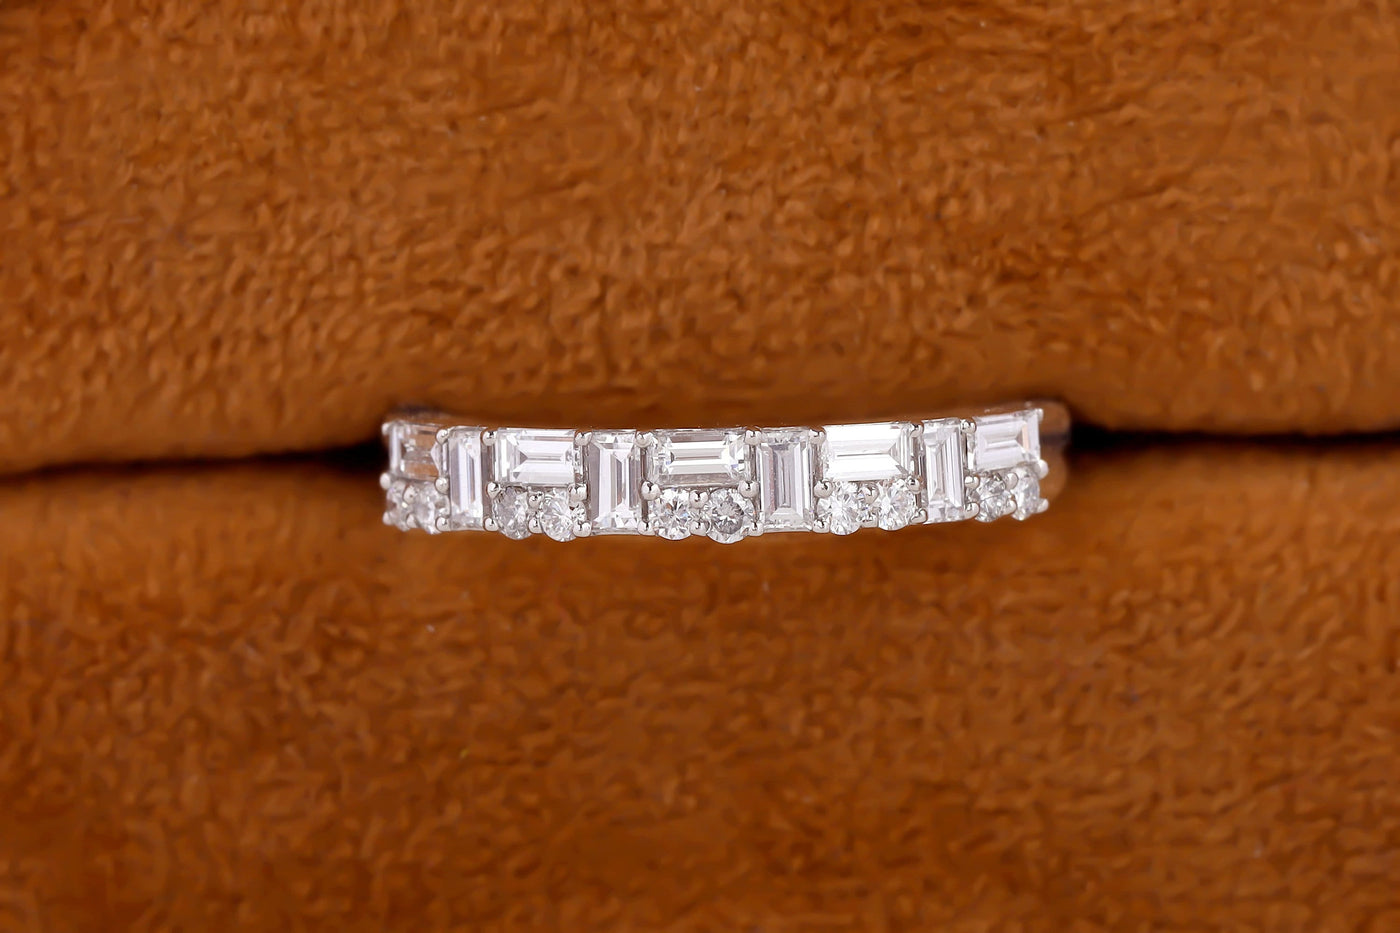 Vintage Baguette Moissanite Band, Solid 14K White Gold Band, Baguette Cut Moissanite Wedding Band, Half Eternity Stacking Band, Promise Band